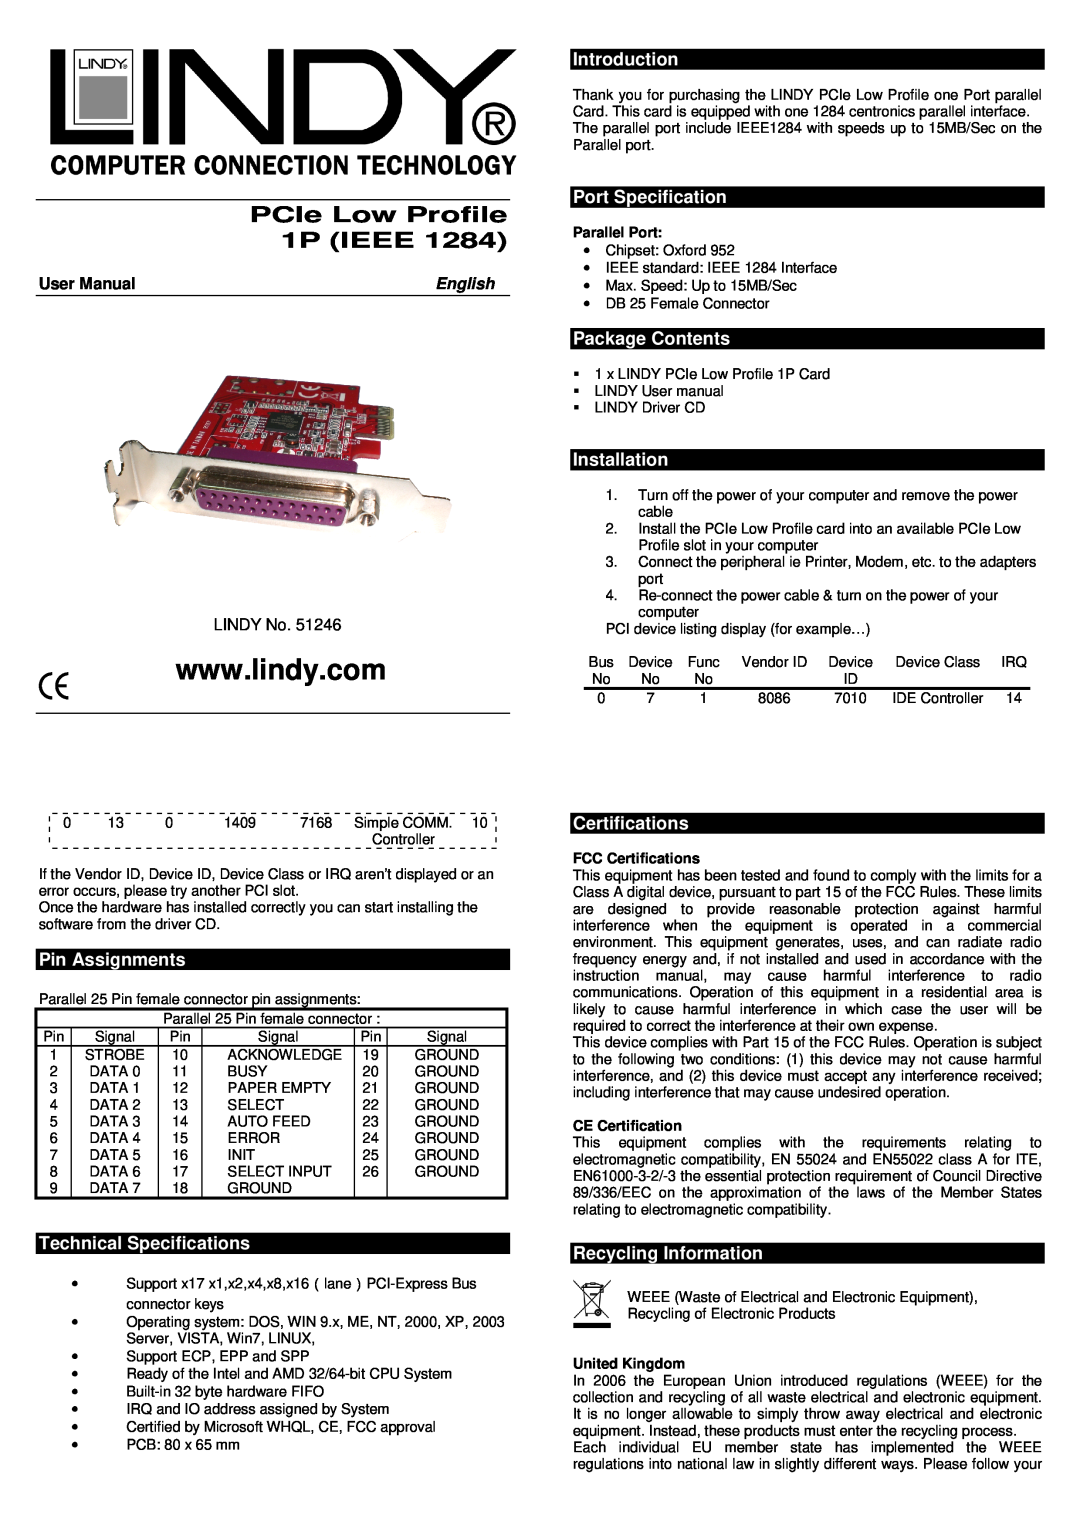 Lindy 51246 technical specifications Parallel Port, FCC Certifications, CE Certification, United Kingdom, Pin Assignments 